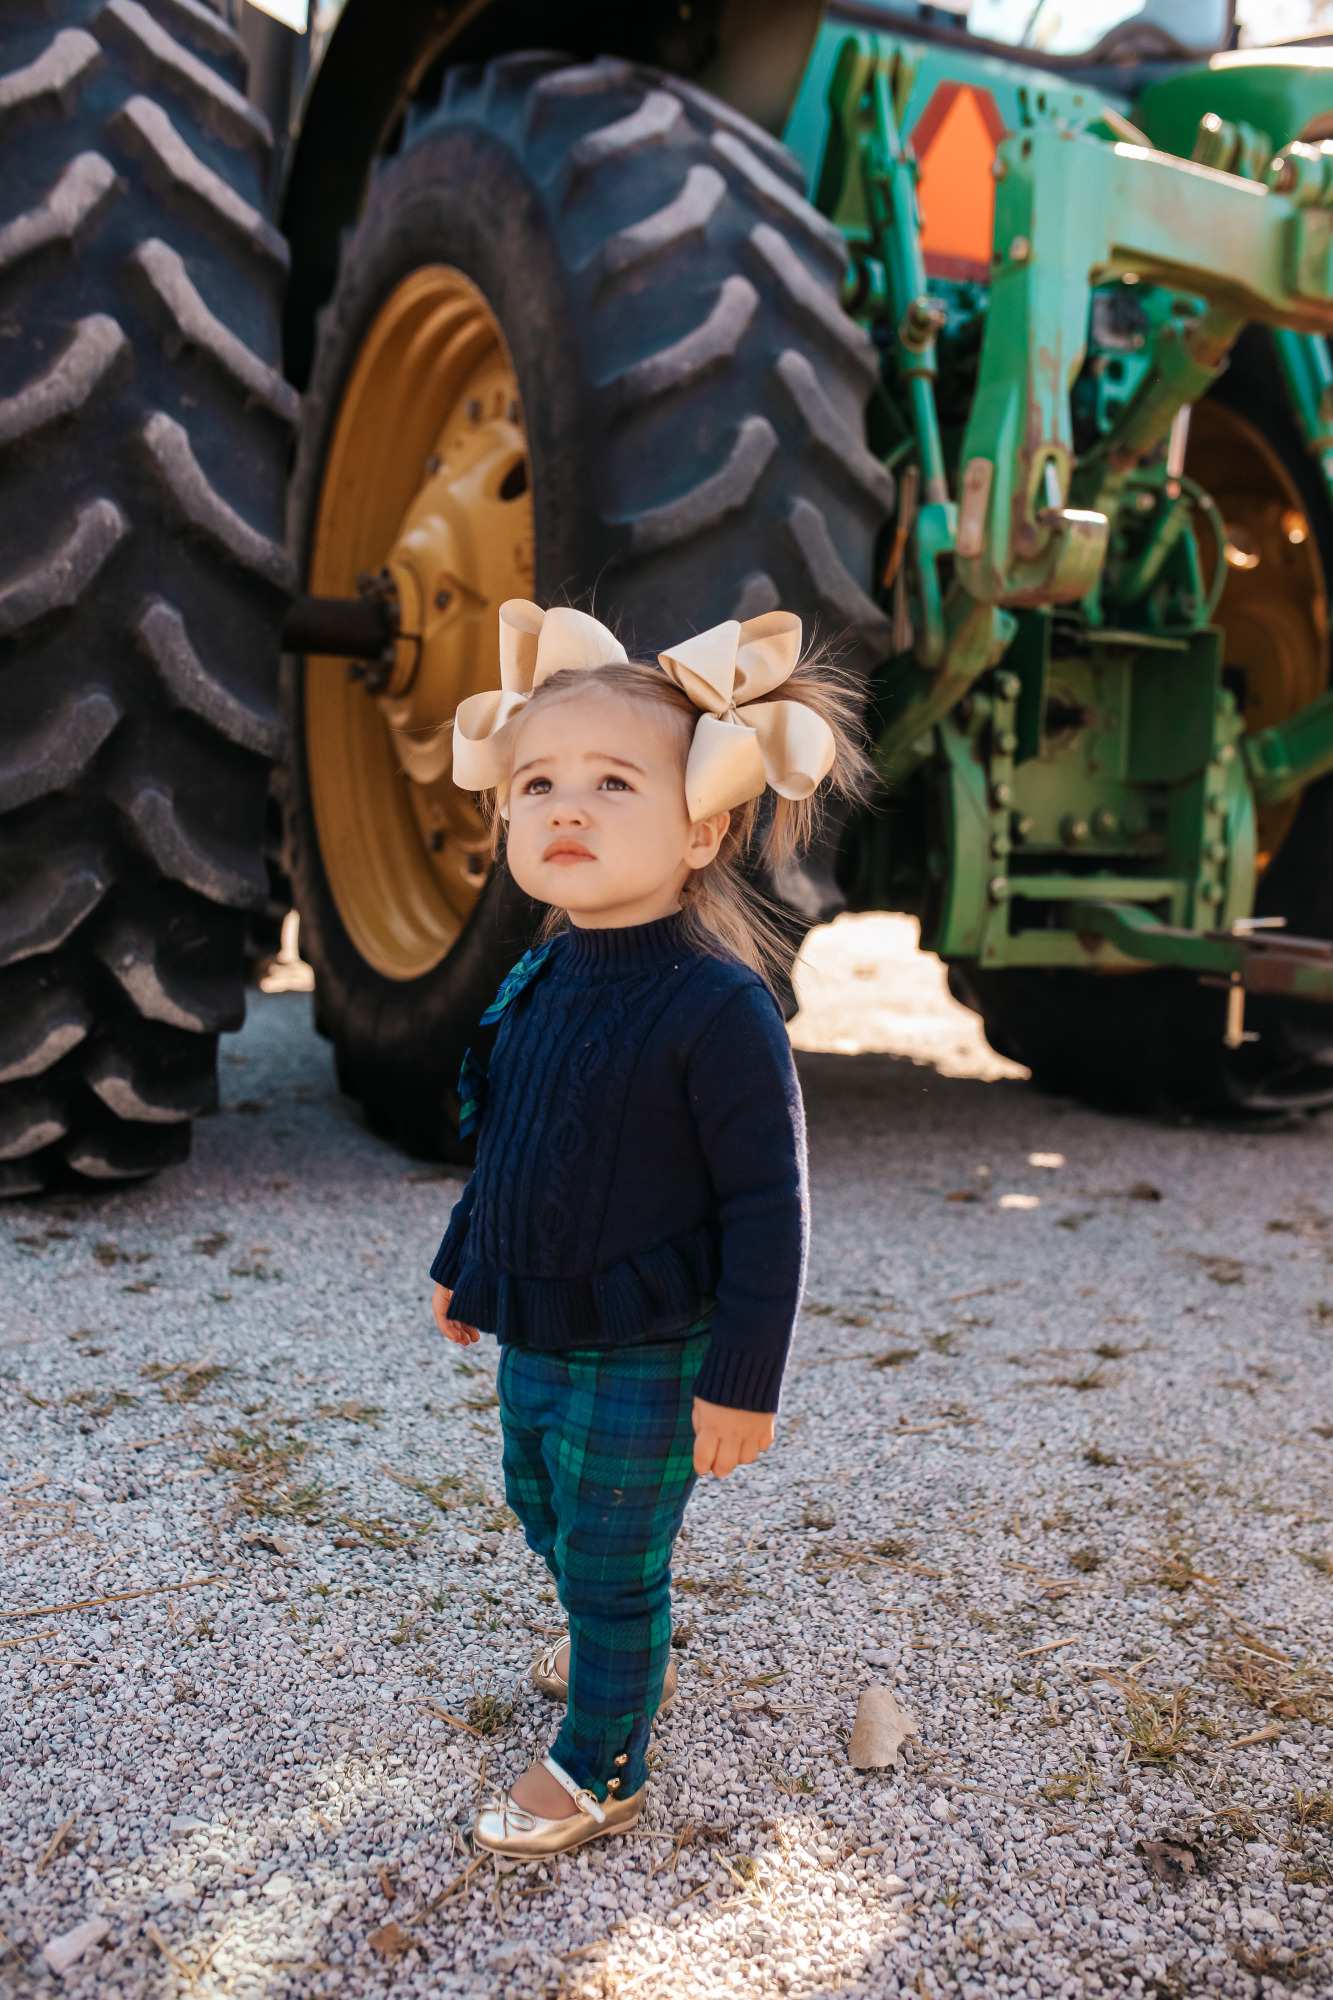 janie and jack kids clothing fall 2020, kids fall fashion 2020, the sweetest thing blog17 |janie and jack kids clothing fall 2020, kids fall fashion 2020, the sweetest thing blog17 | Janie and Jack Kids Clothing by popular US fashion blog, The Sweetest Thing: image of a girl wearing a Janie and Jack PEPLUM BOW SWEATER, Janie and Jack PLAID PONTE BUTTON CUFF PANT, and Janie and Jack METALLIC BOW FLAT.